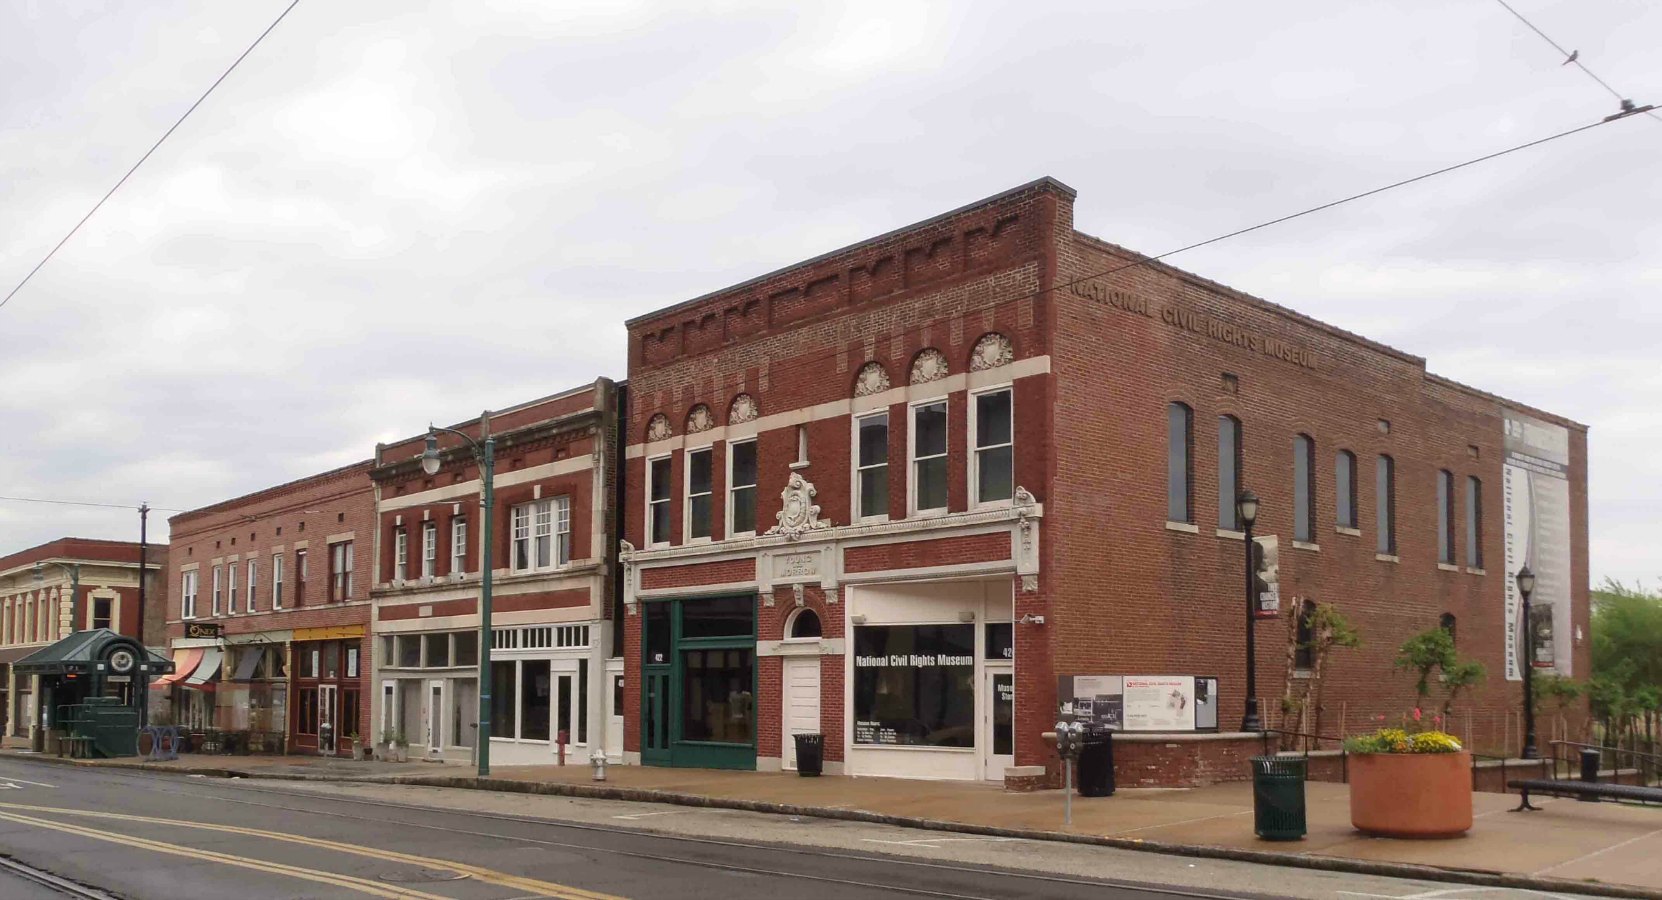 The Young & Morrow building (right) and James Earl Ray's rooming house (center) on S. Main Street, Memphis, Tennessee.